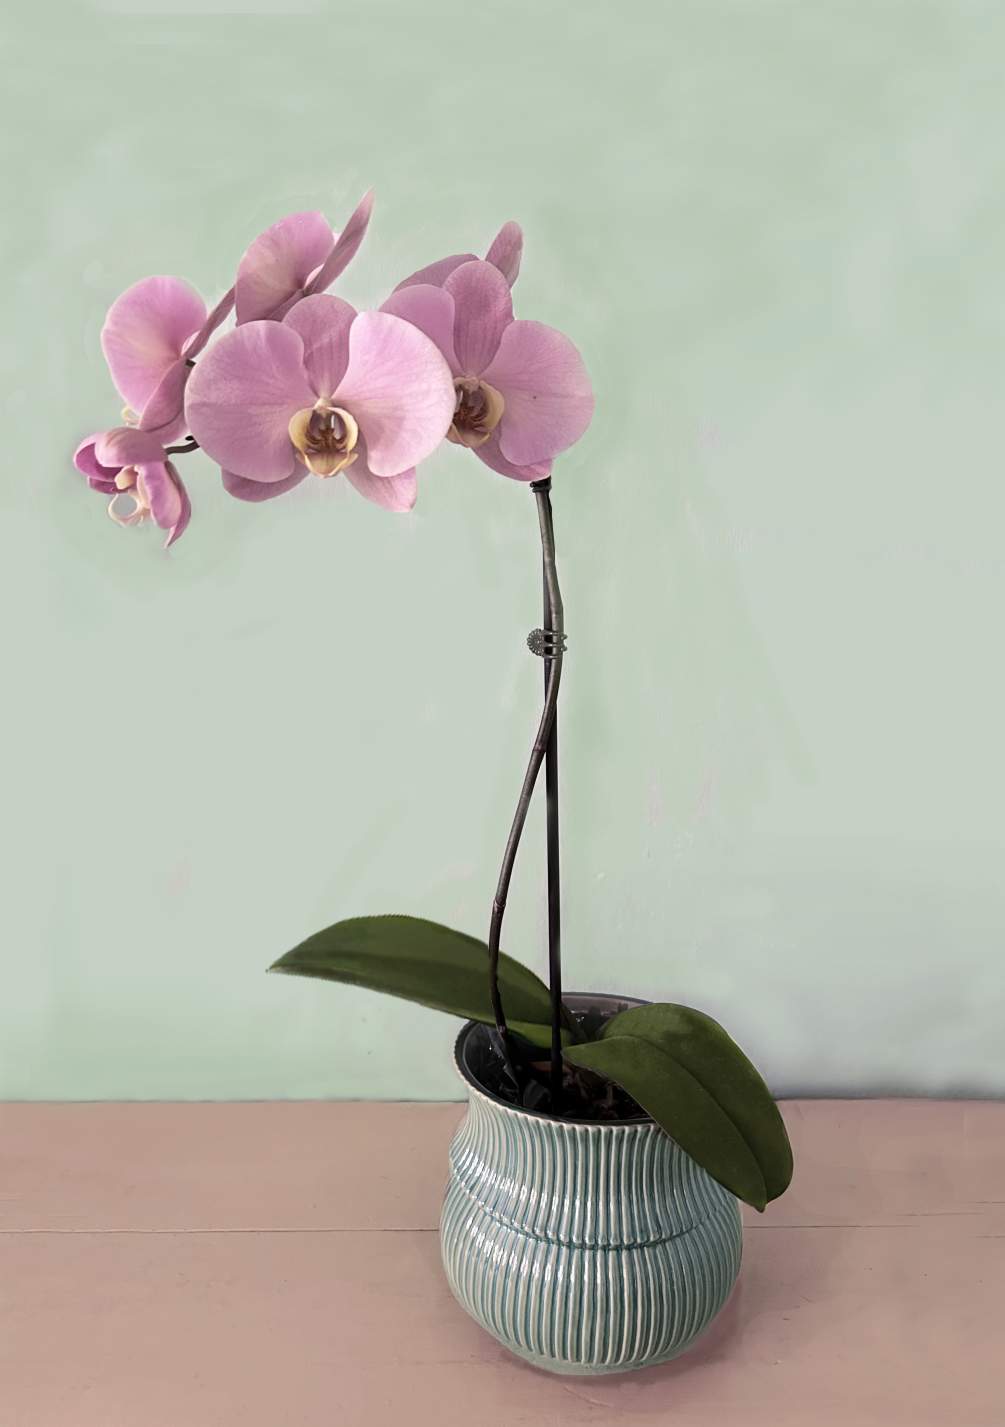 A very pretty mauve colored 1 stemmed Phalaenopsis orchid of the best